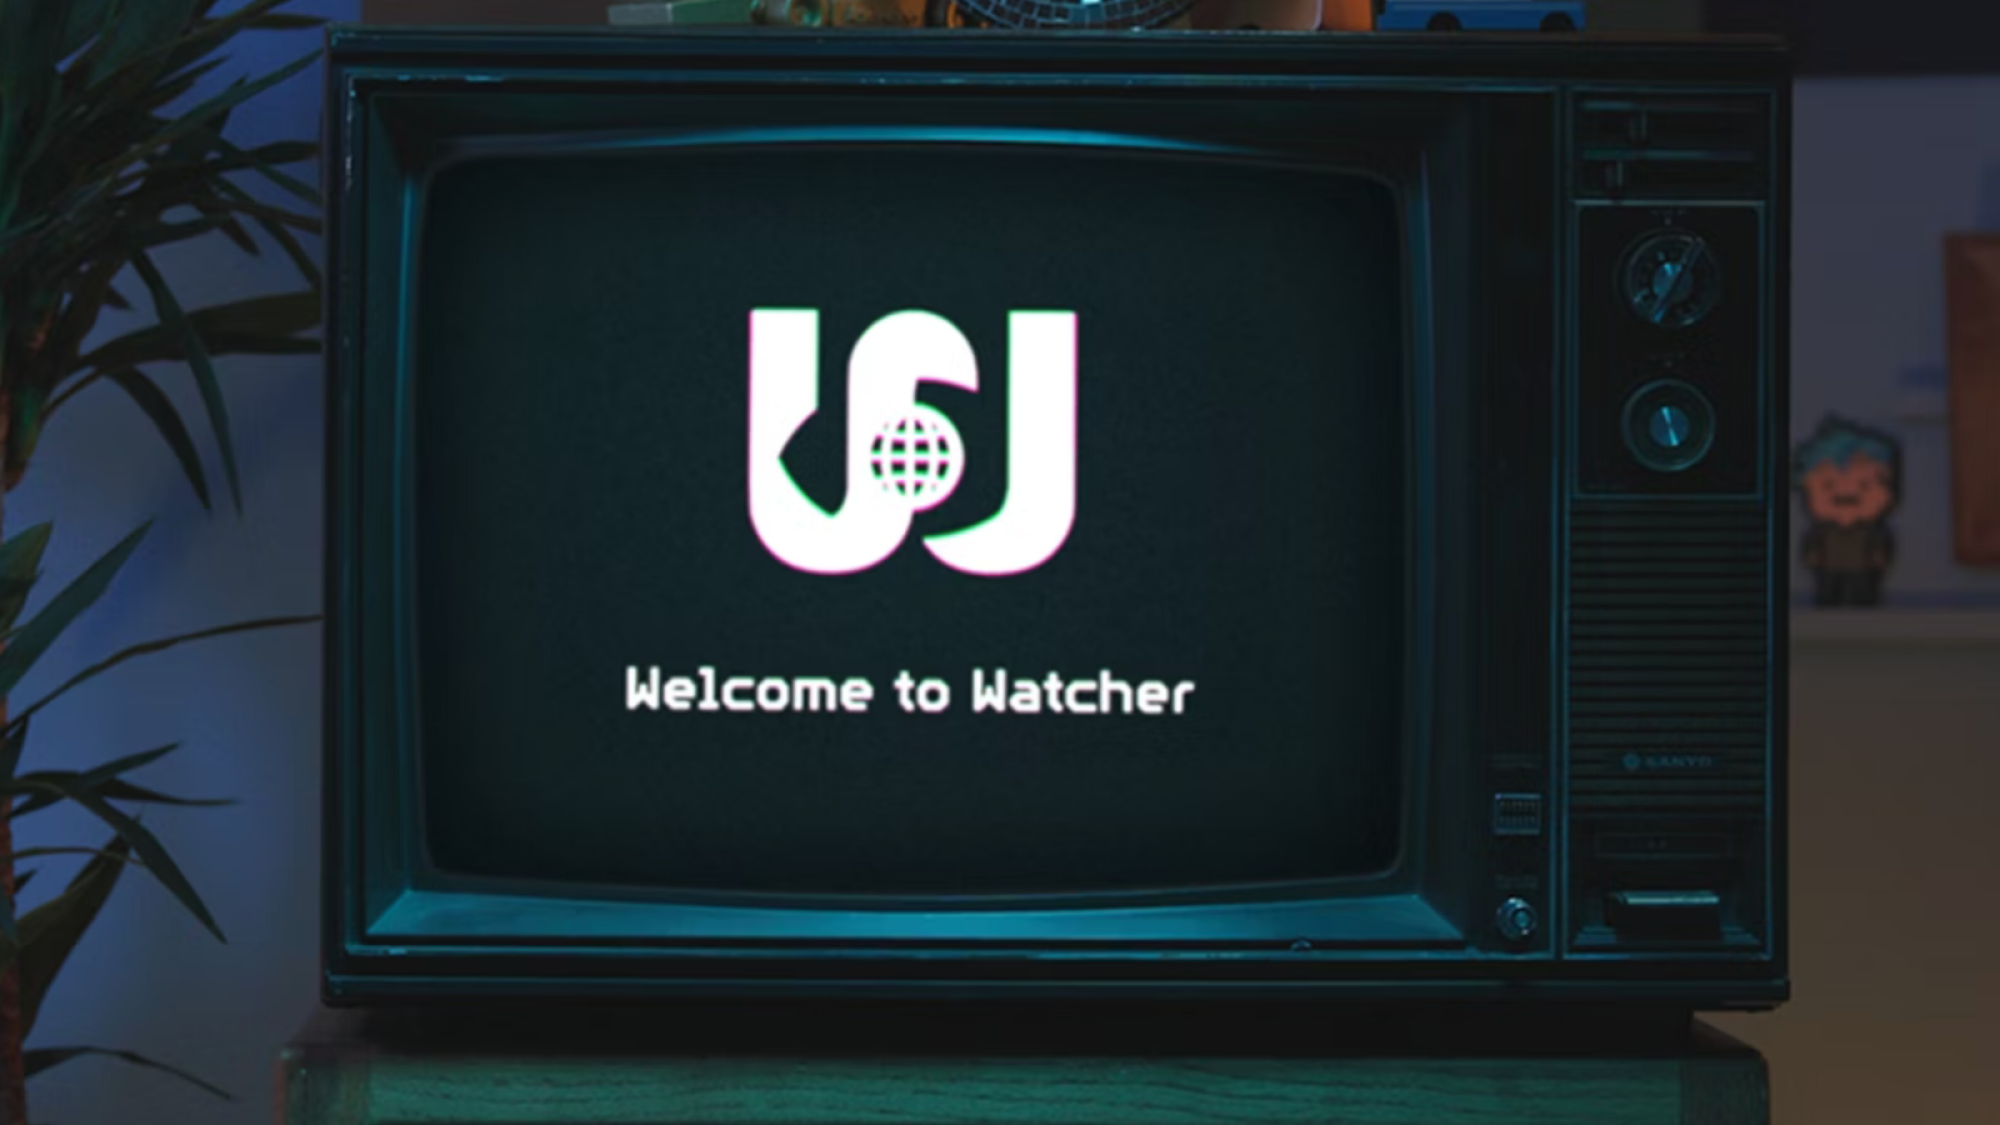 The Watcher logo on a television.